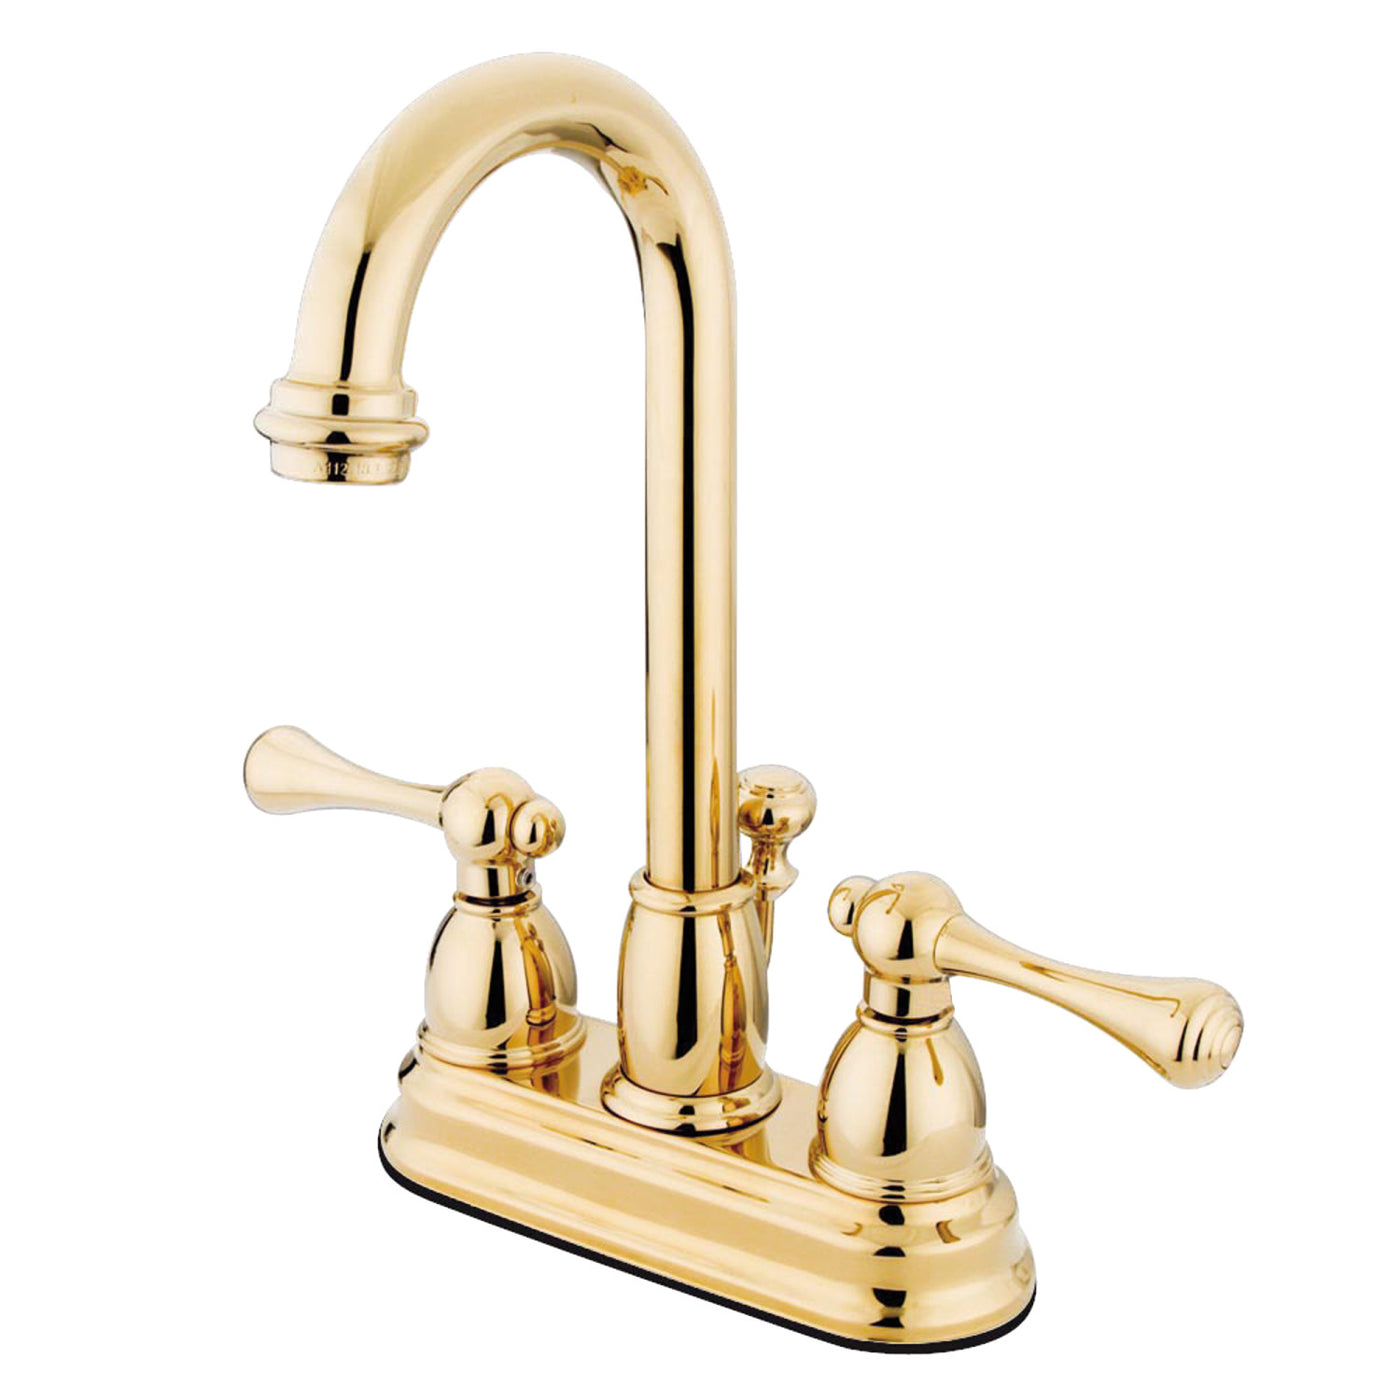 Elements of Design EB3612BL 4-Inch Centerset Bathroom Faucet, Polished Brass